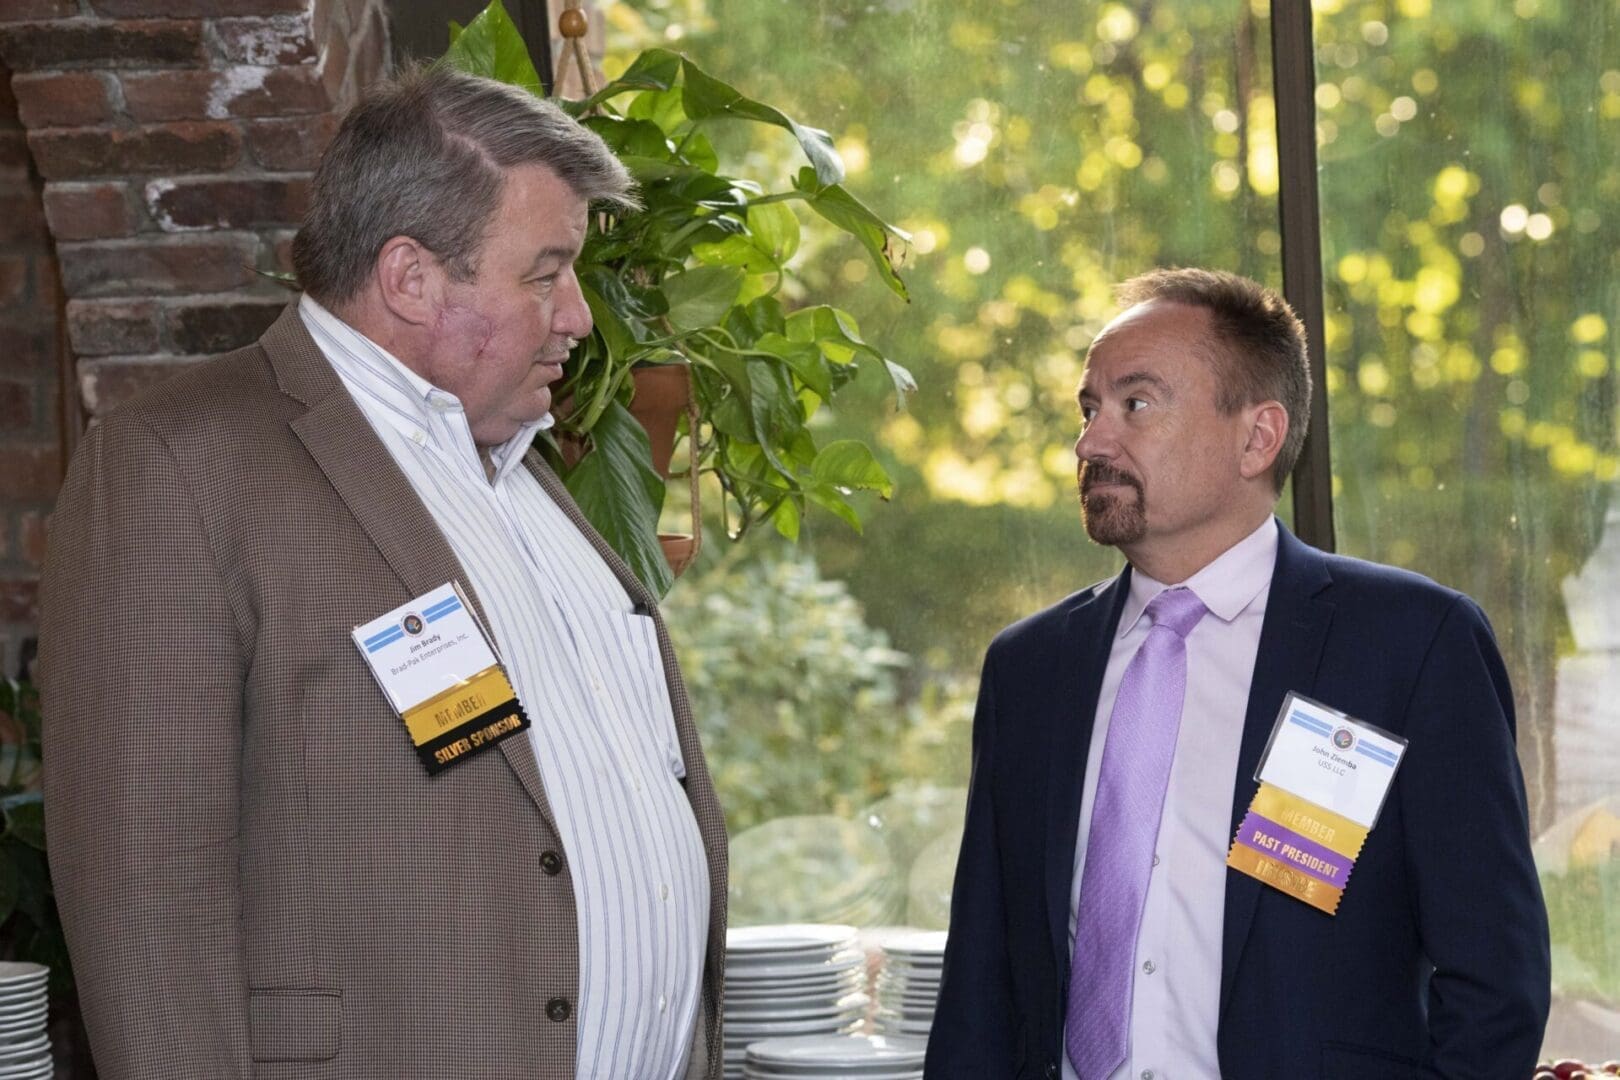 Two men talking to each other at an event.